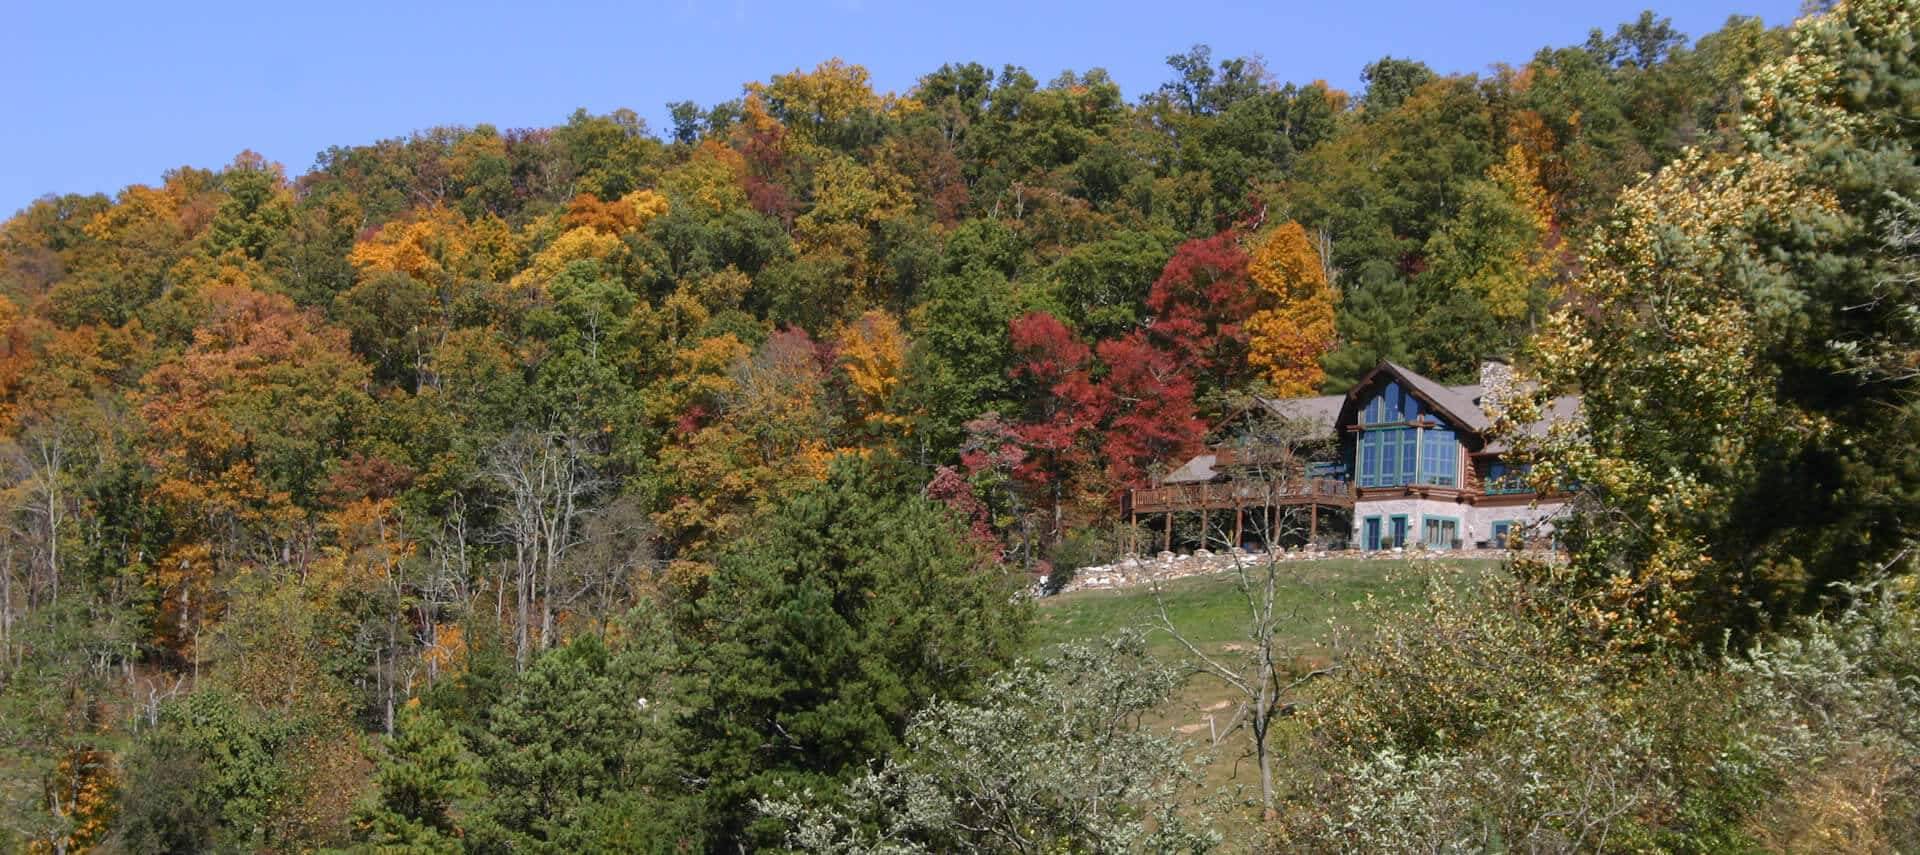 Large house with exapnive windows set onto hillside covered in autumn foliage. 